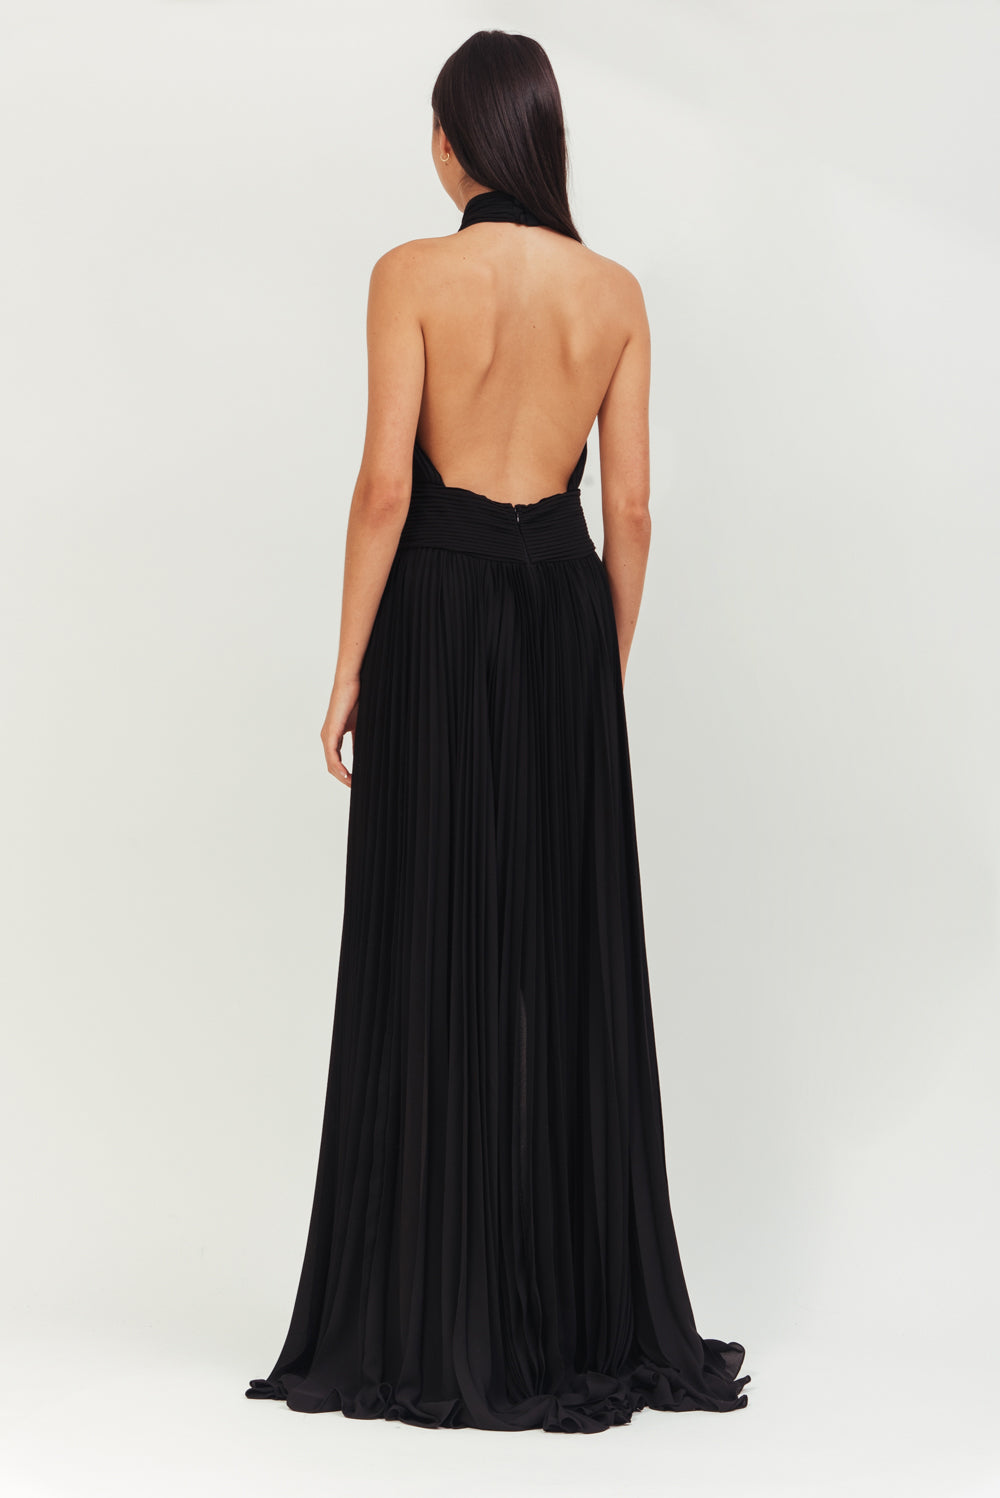 BLACK LONG CREPE PLISSE DRESS WITH X IN FRONT AND OPEN BACK